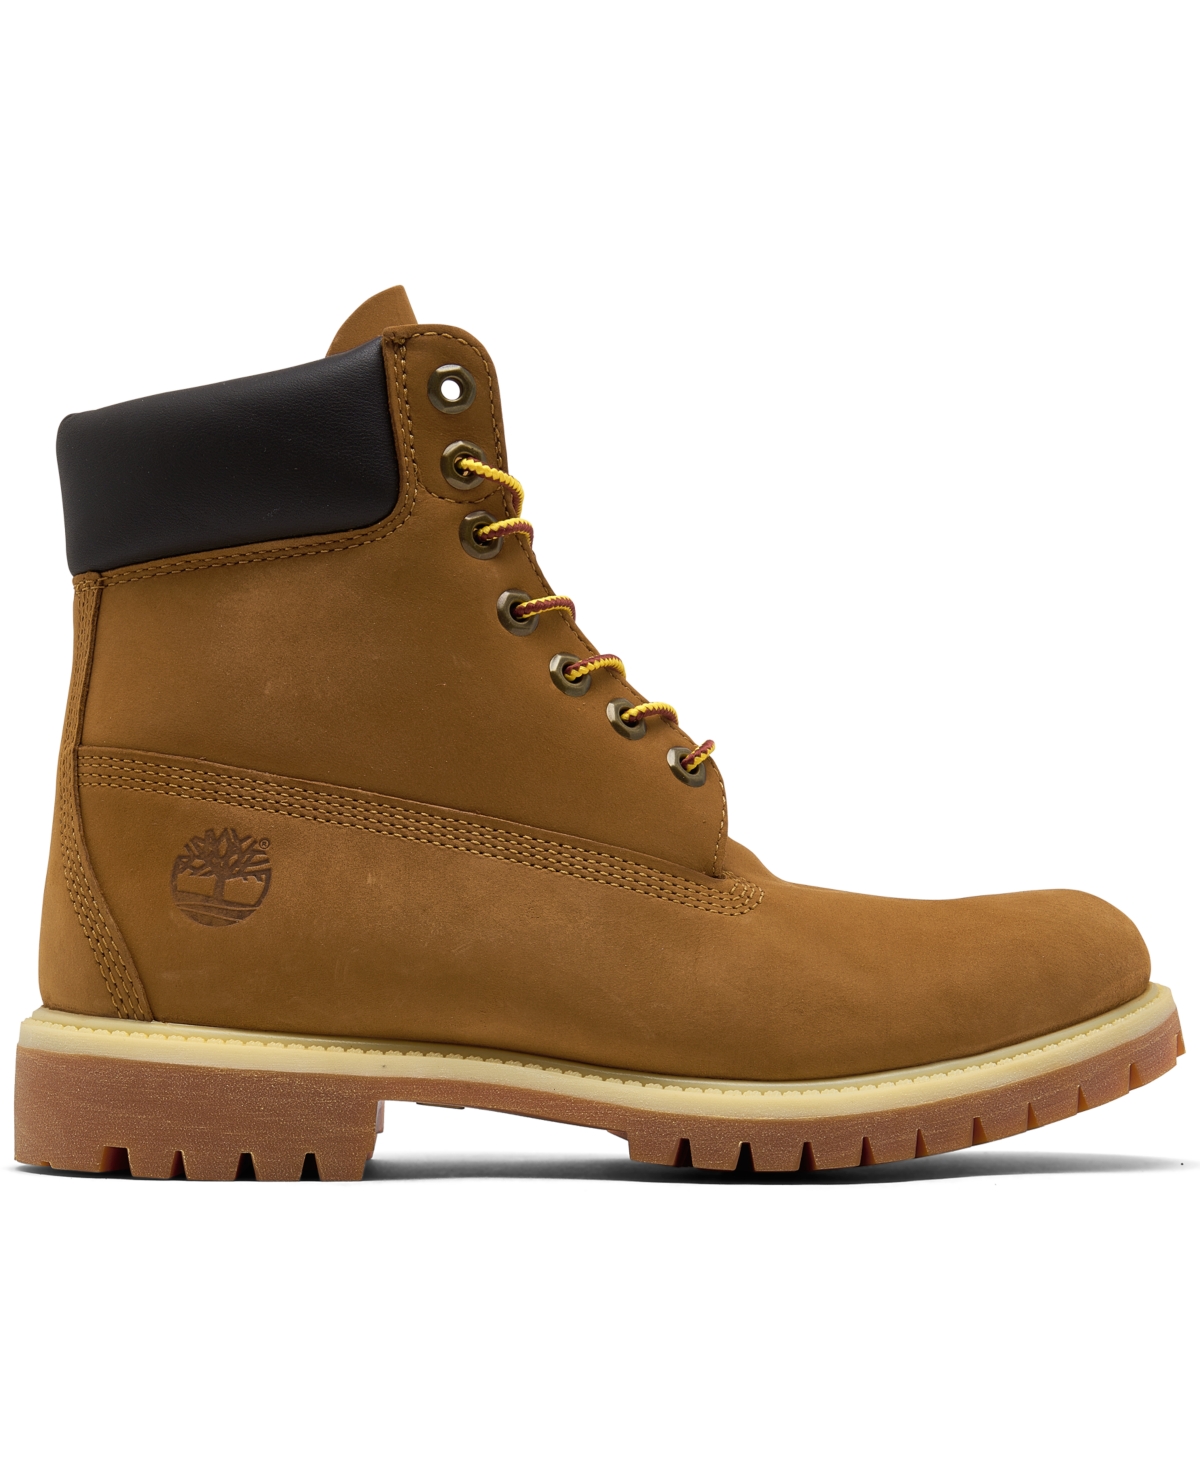 Shop Timberland Men's 6" Premium Water-resistant Boots From Finish Line In Dark Wheat Nubuck